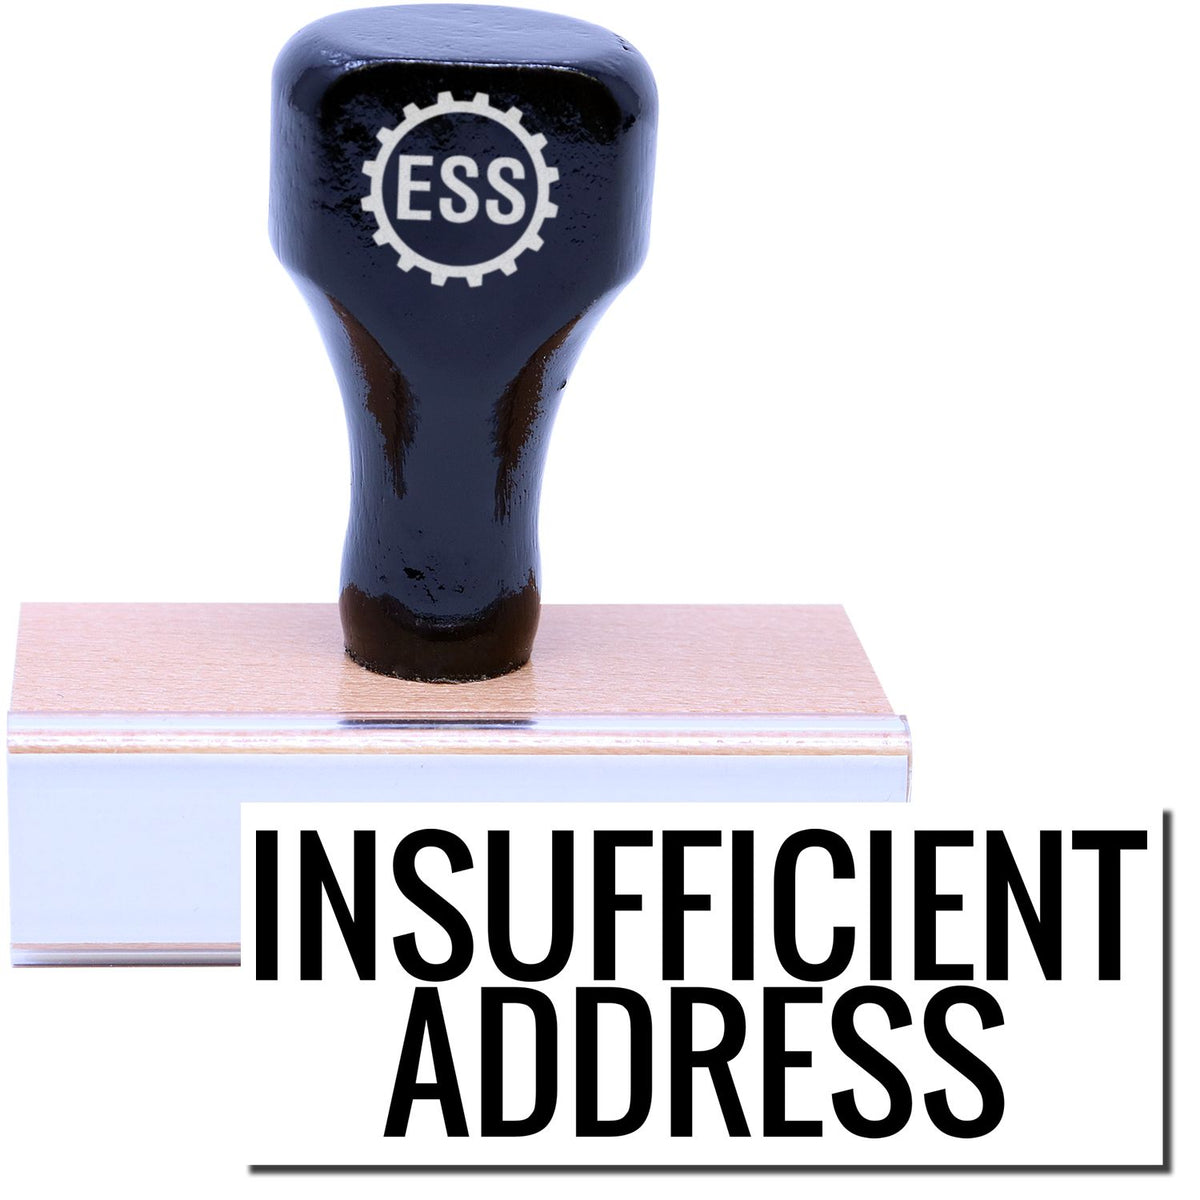 A stock office rubber stamp with a stamped image showing how the text &quot;INSUFFICIENT ADDRESS&quot; in a large font is displayed after stamping.